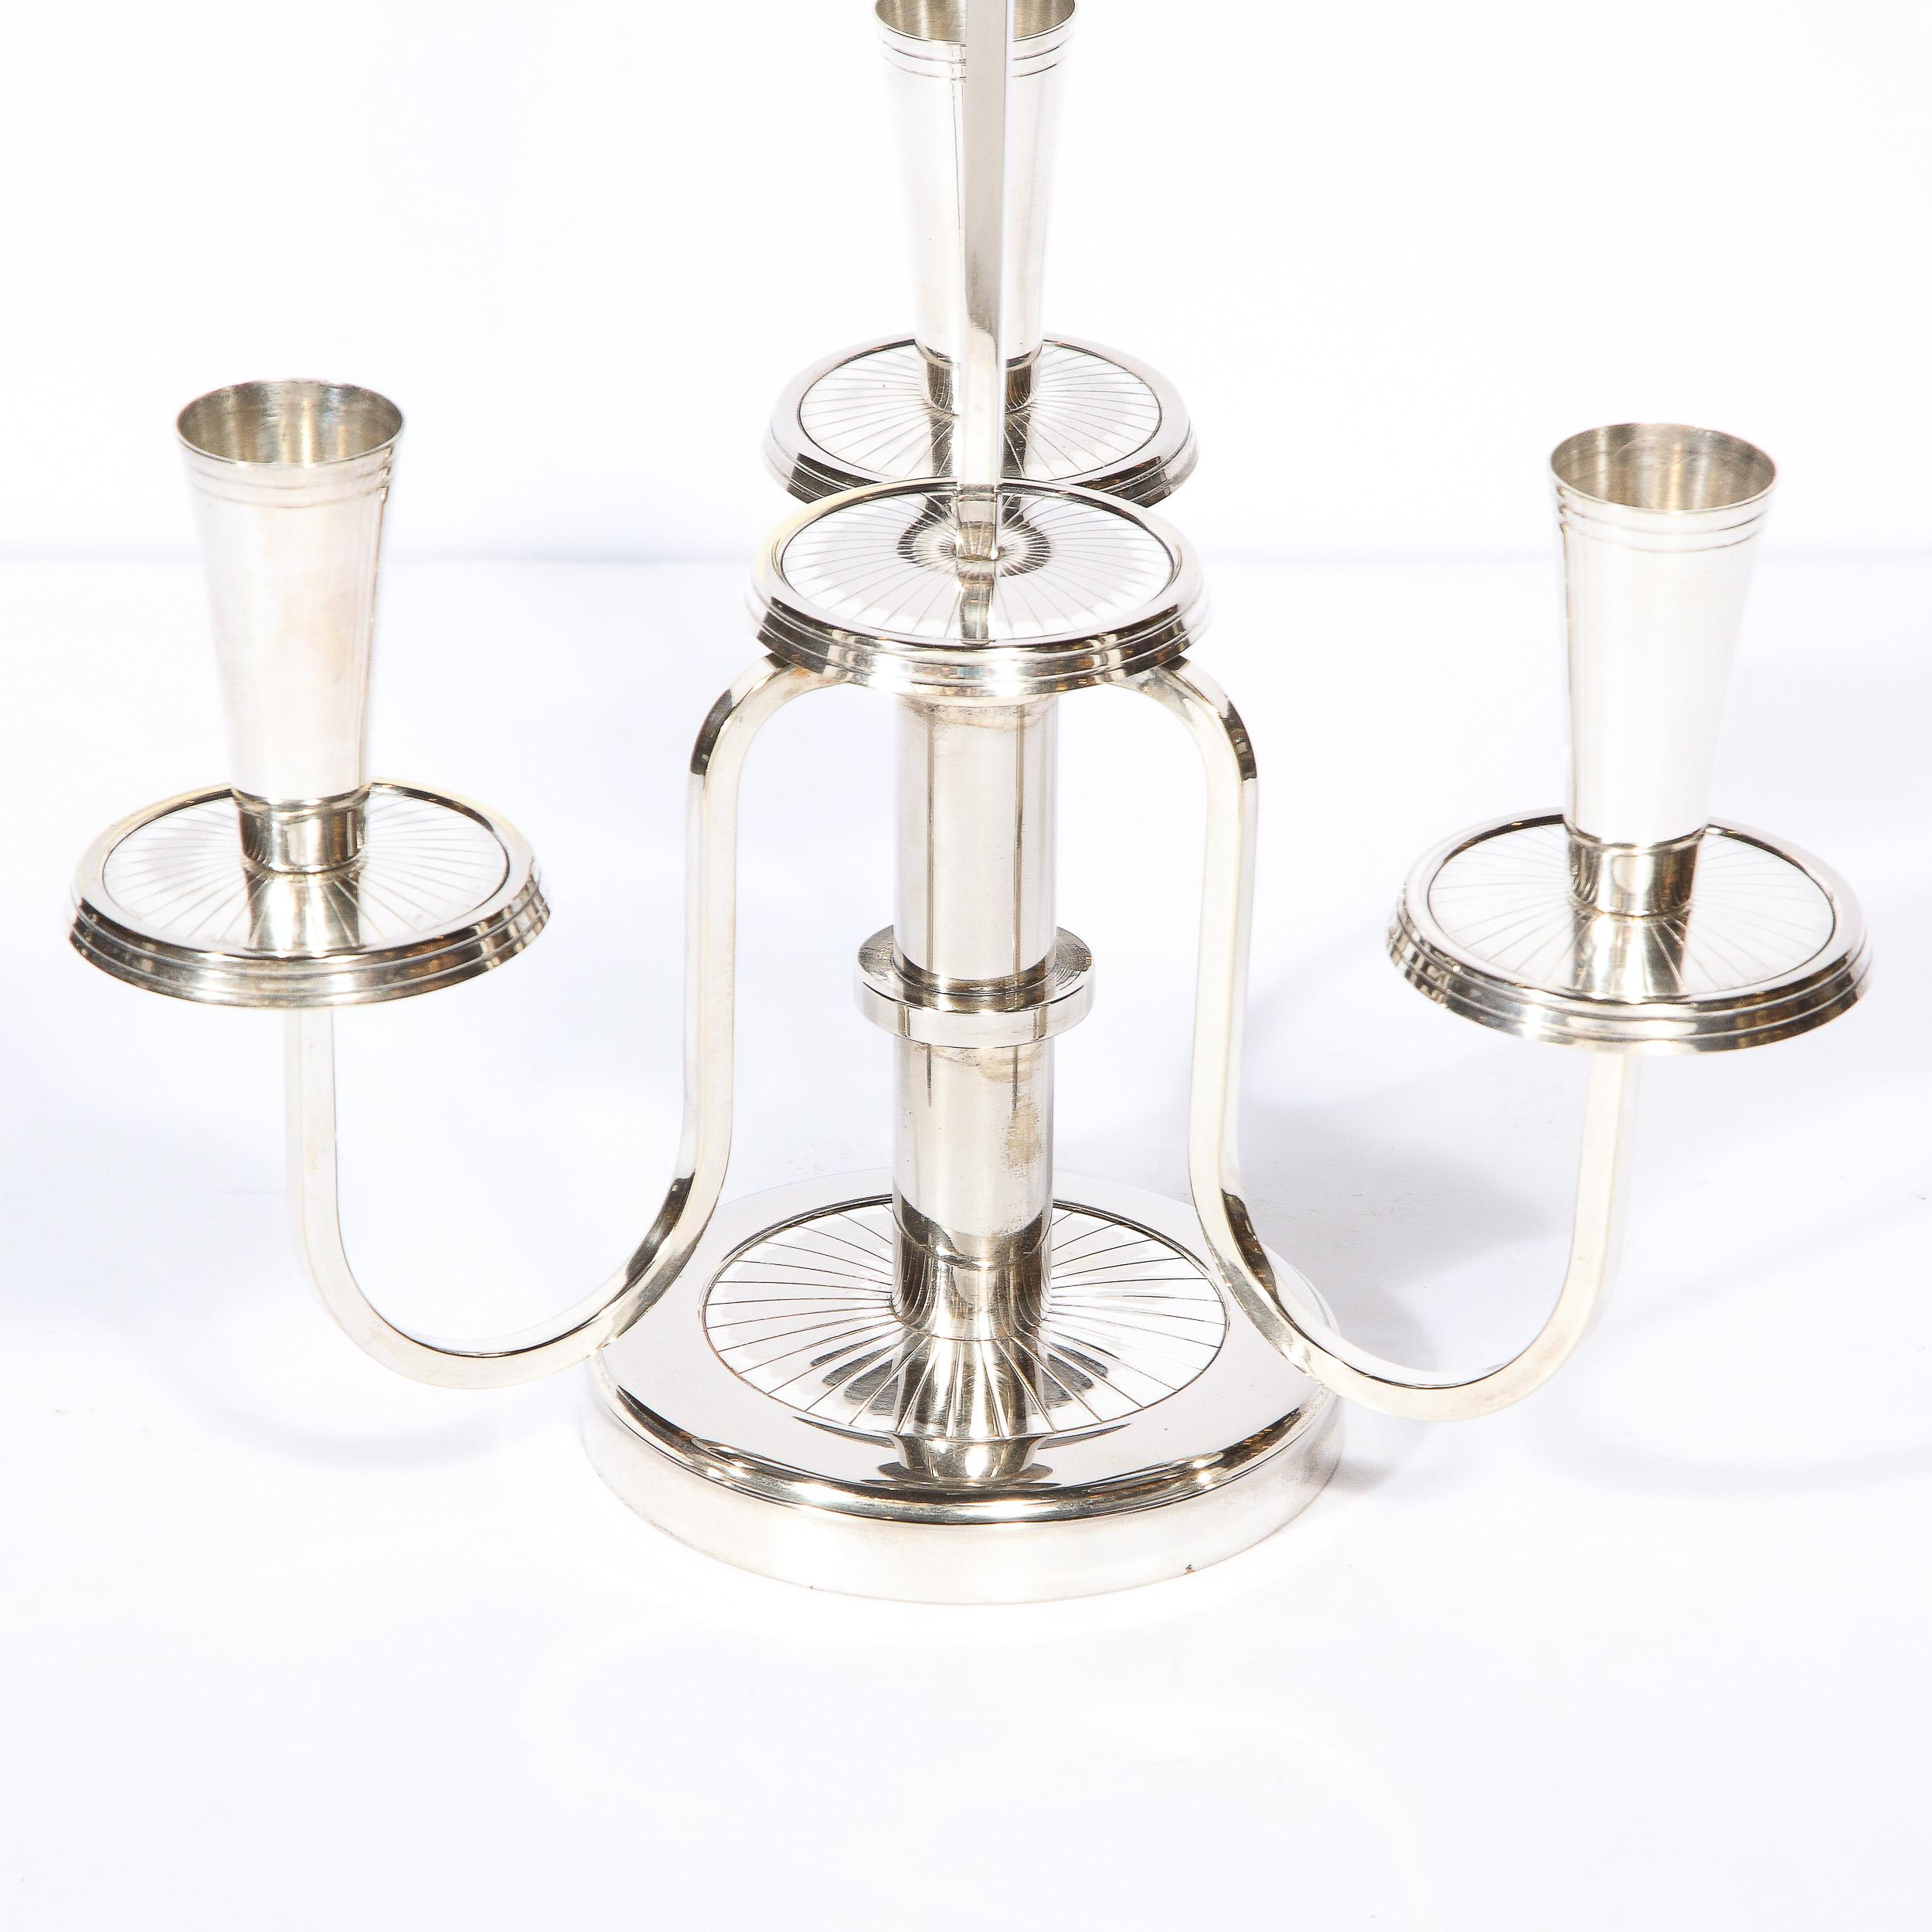 Mid-Century Modern 'Eldorado' Signed George Briard Silver Candlestick Holder In Excellent Condition For Sale In New York, NY